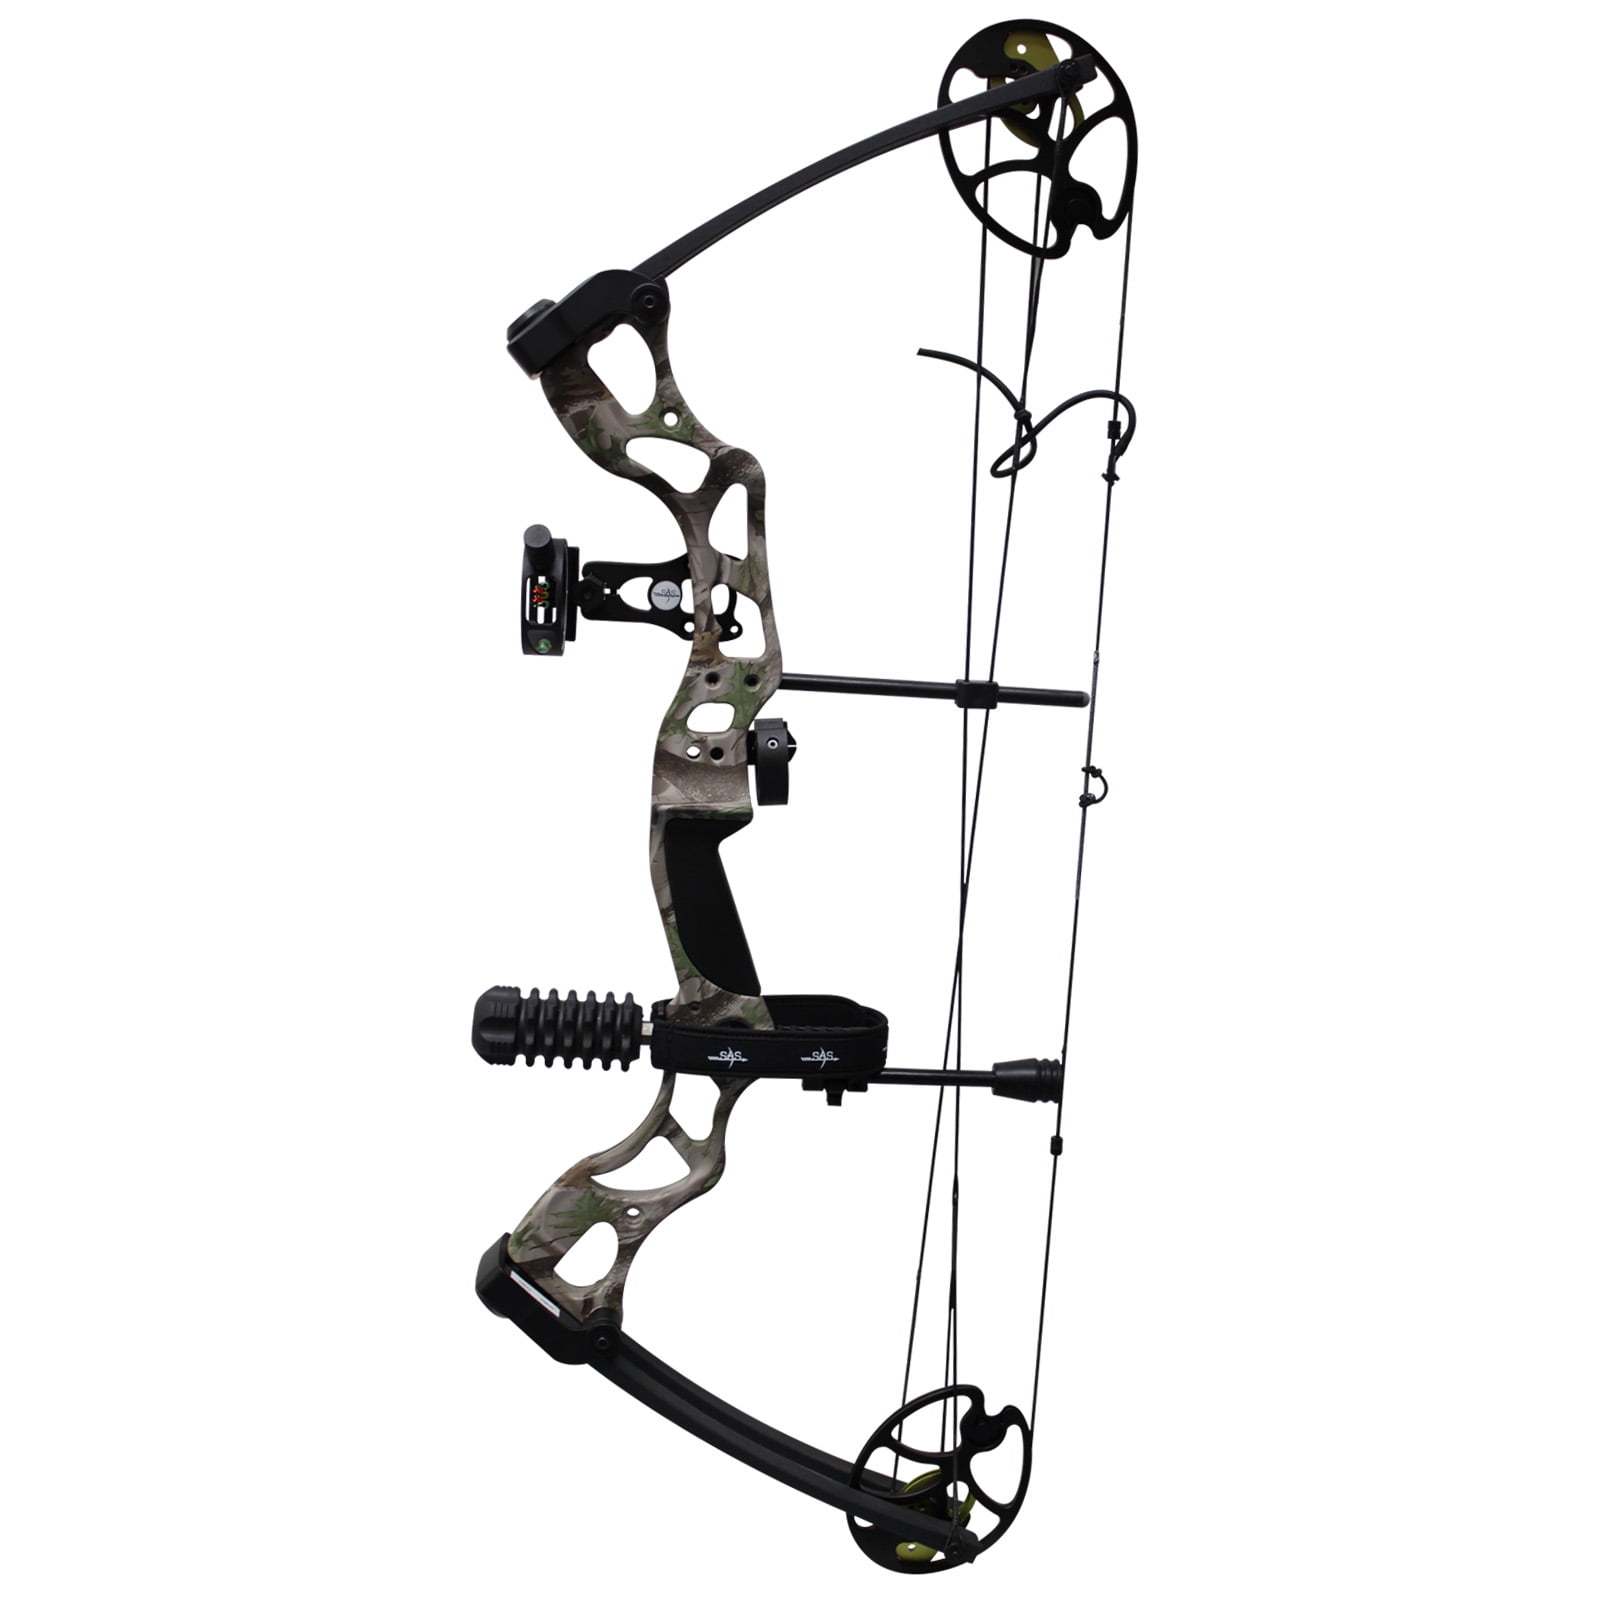 Archery Compound Bow Set 30-70lbs Arrows Sight Stabilizer Hunting Shooting 